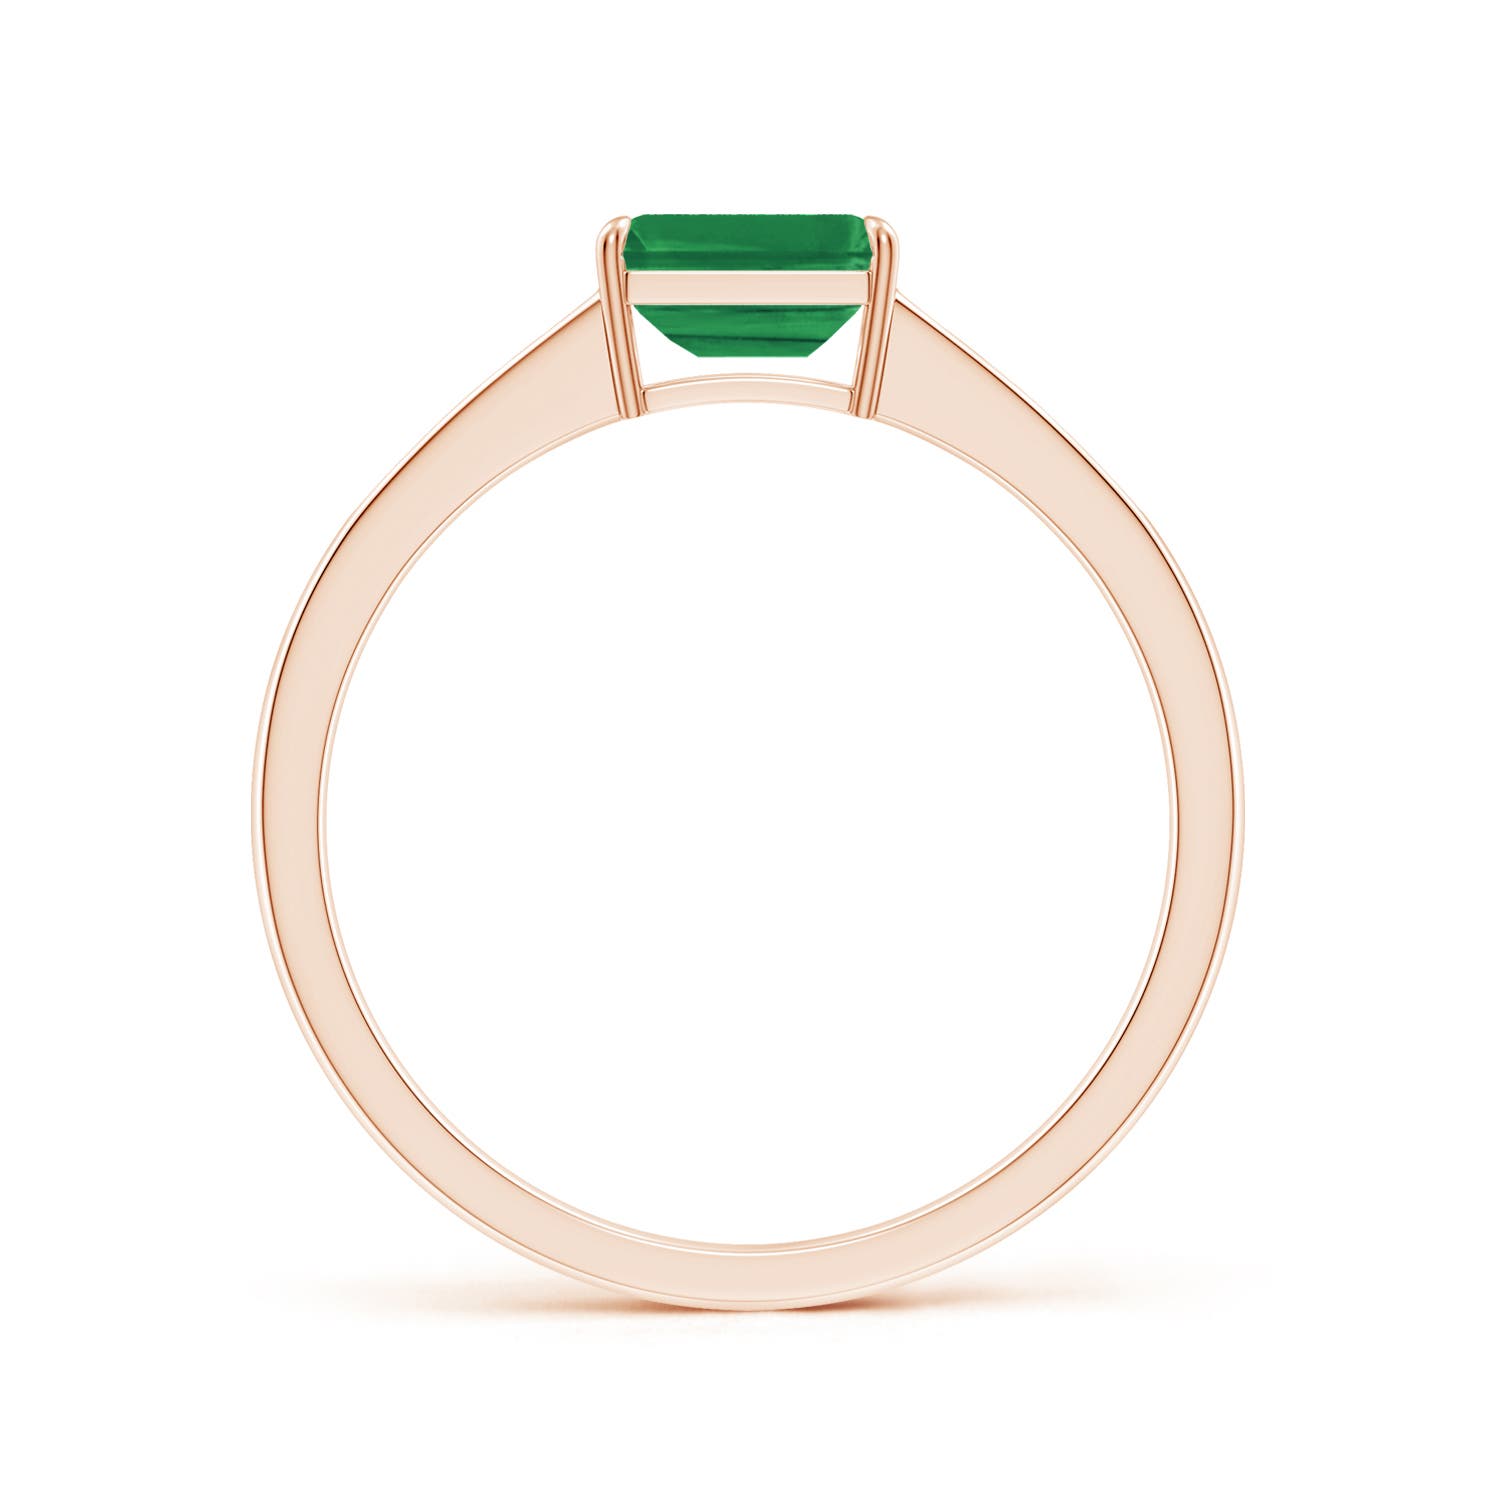 AA - Emerald / 0.61 CT / 14 KT Rose Gold